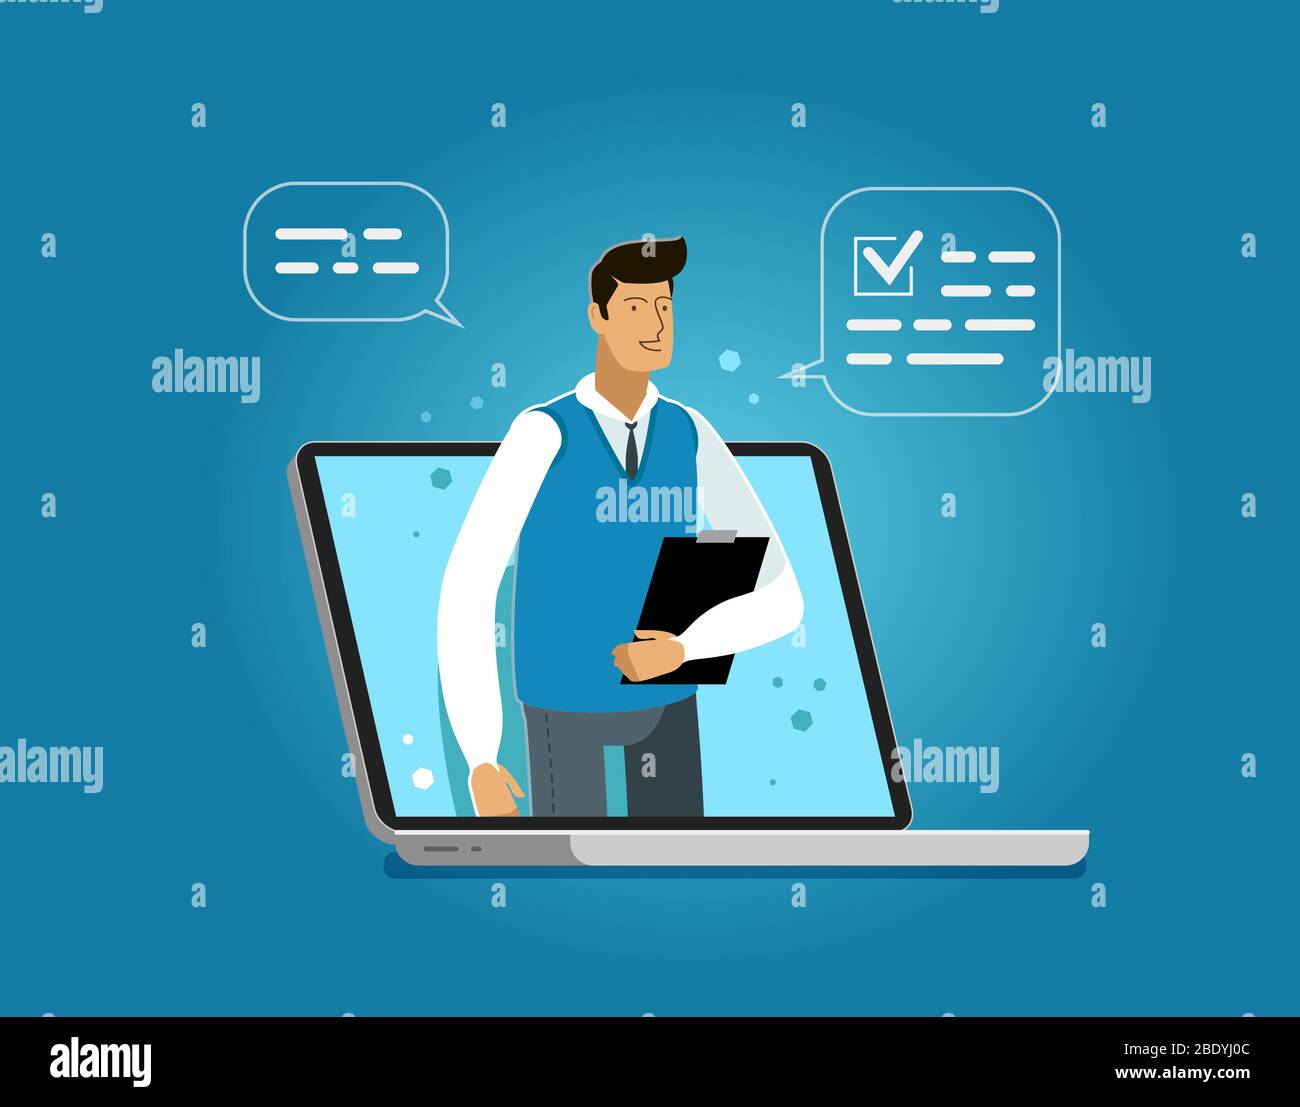 Business services provided through an application on laptop. Vector illustration Stock Vector